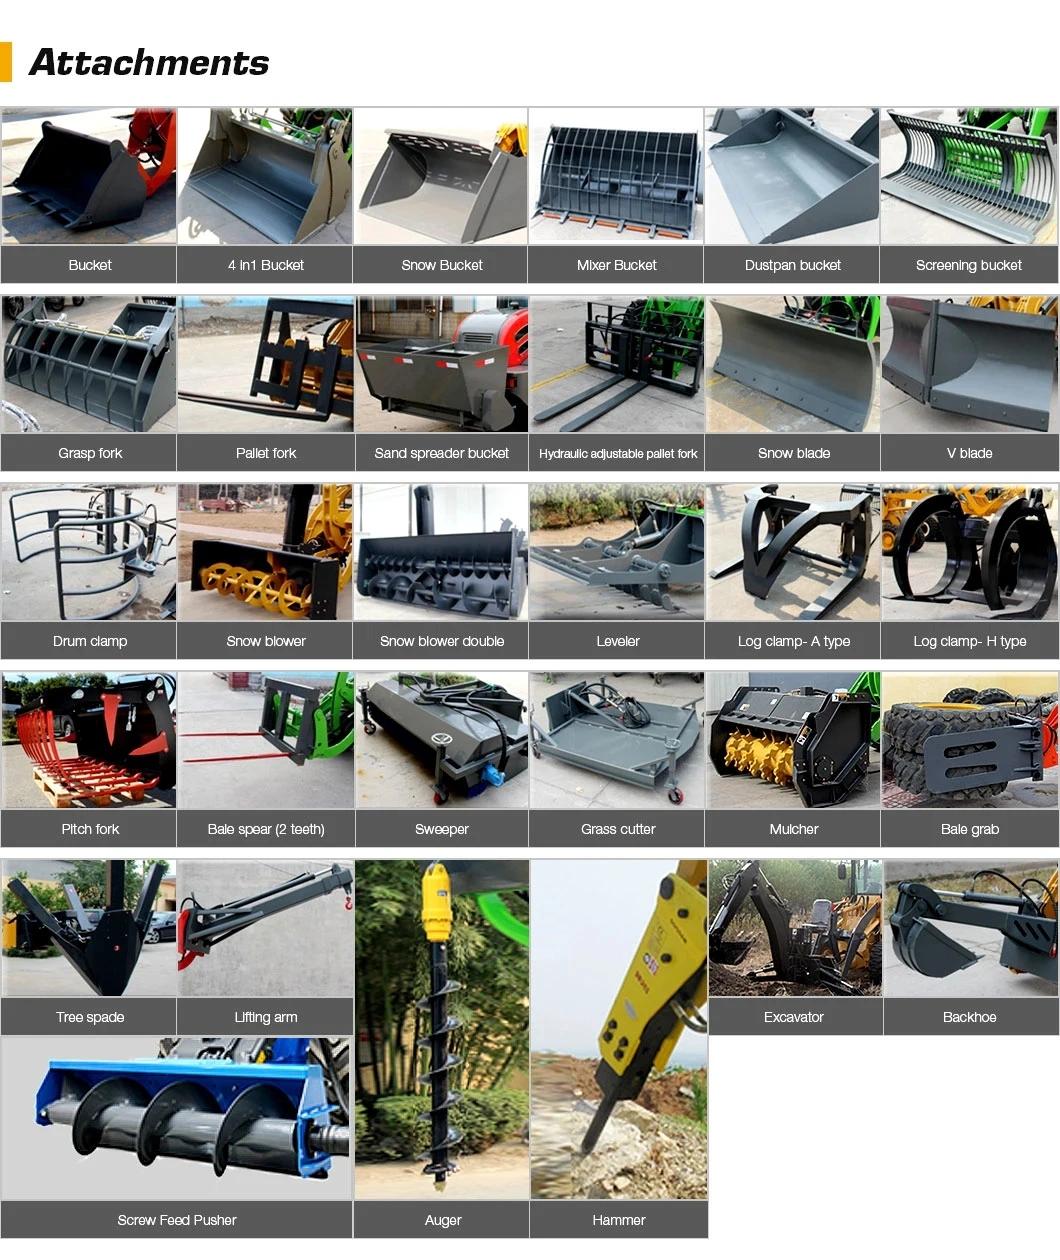 China Supplier Hzm Compact/Articulated/Multifunctional with CE/Euro 5/Bagger Radlader Bucket/Fork/Cab/Rops/Telescopic 825t Loader for Sales/Snow